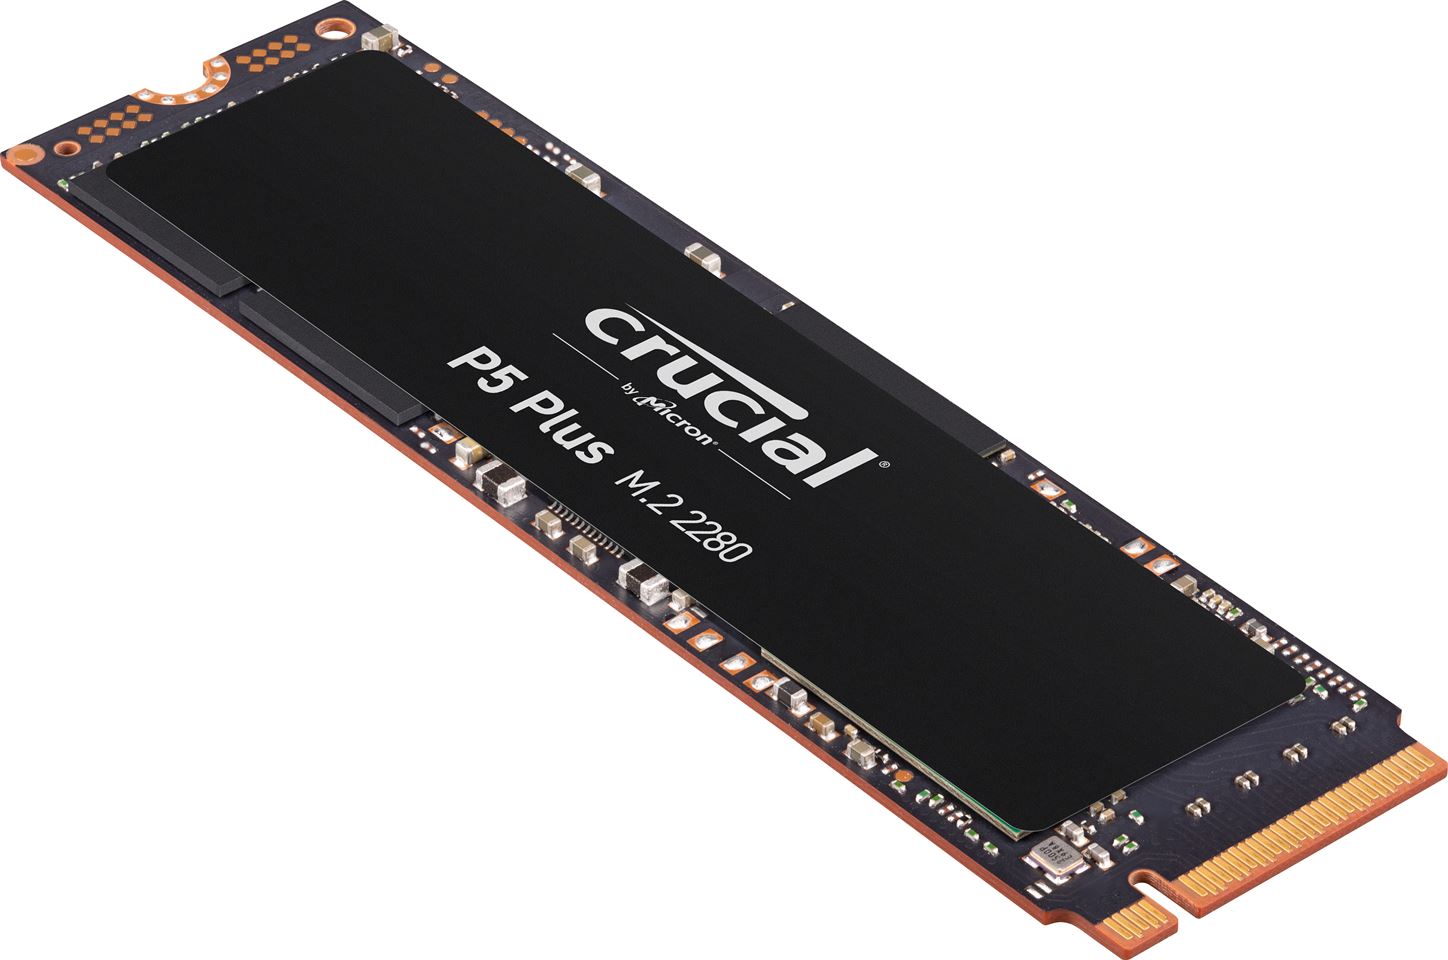 crucial-p5-plus-ssd-dynamic-image-left-image small